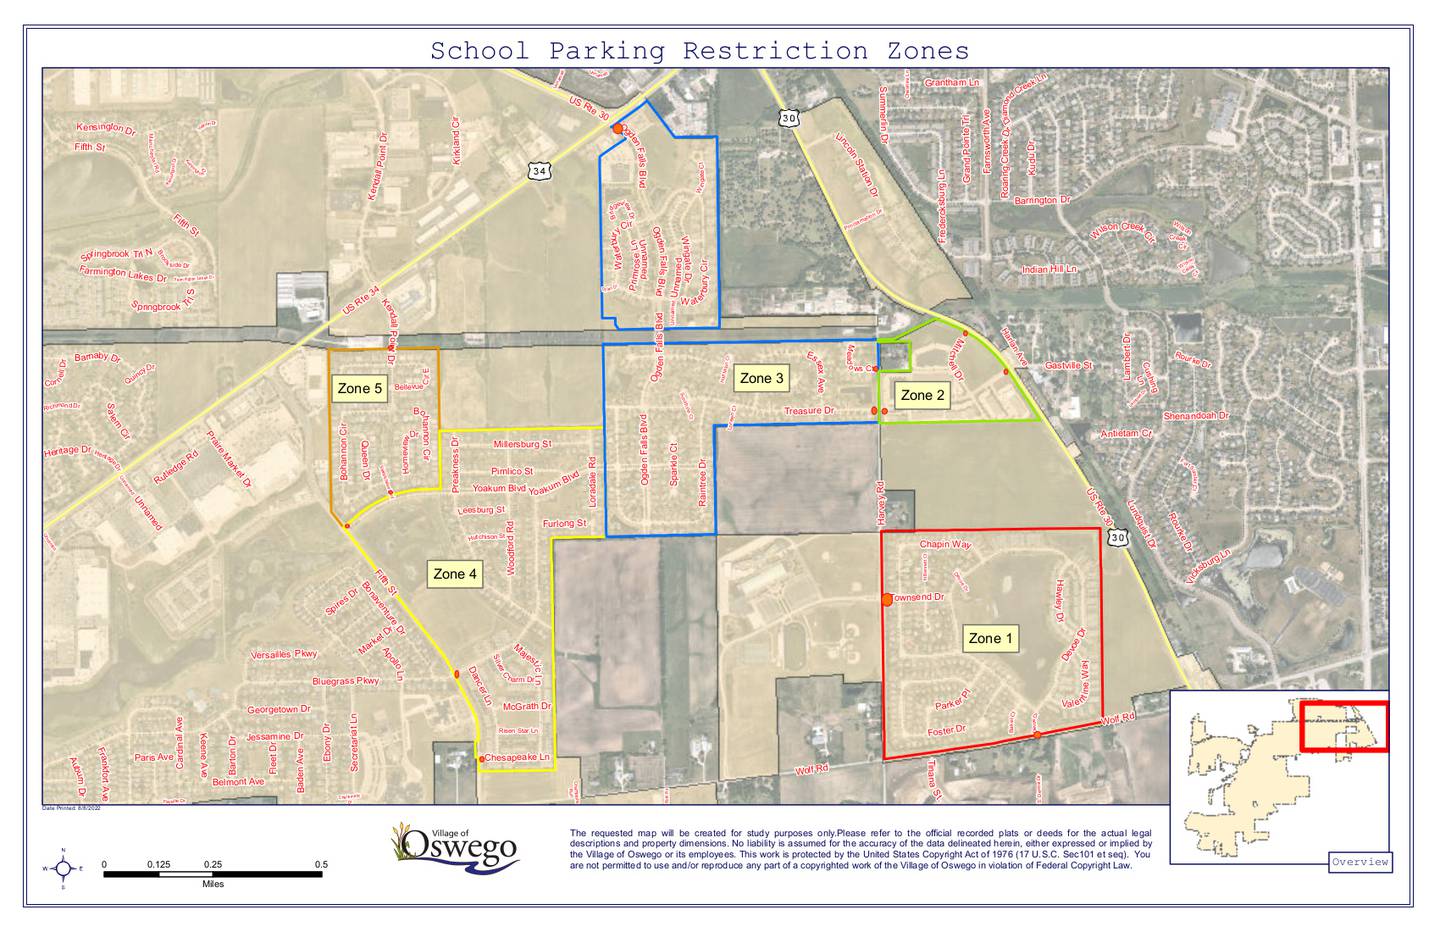 Proposal of new parking zones for overflow Oswego East High School students.